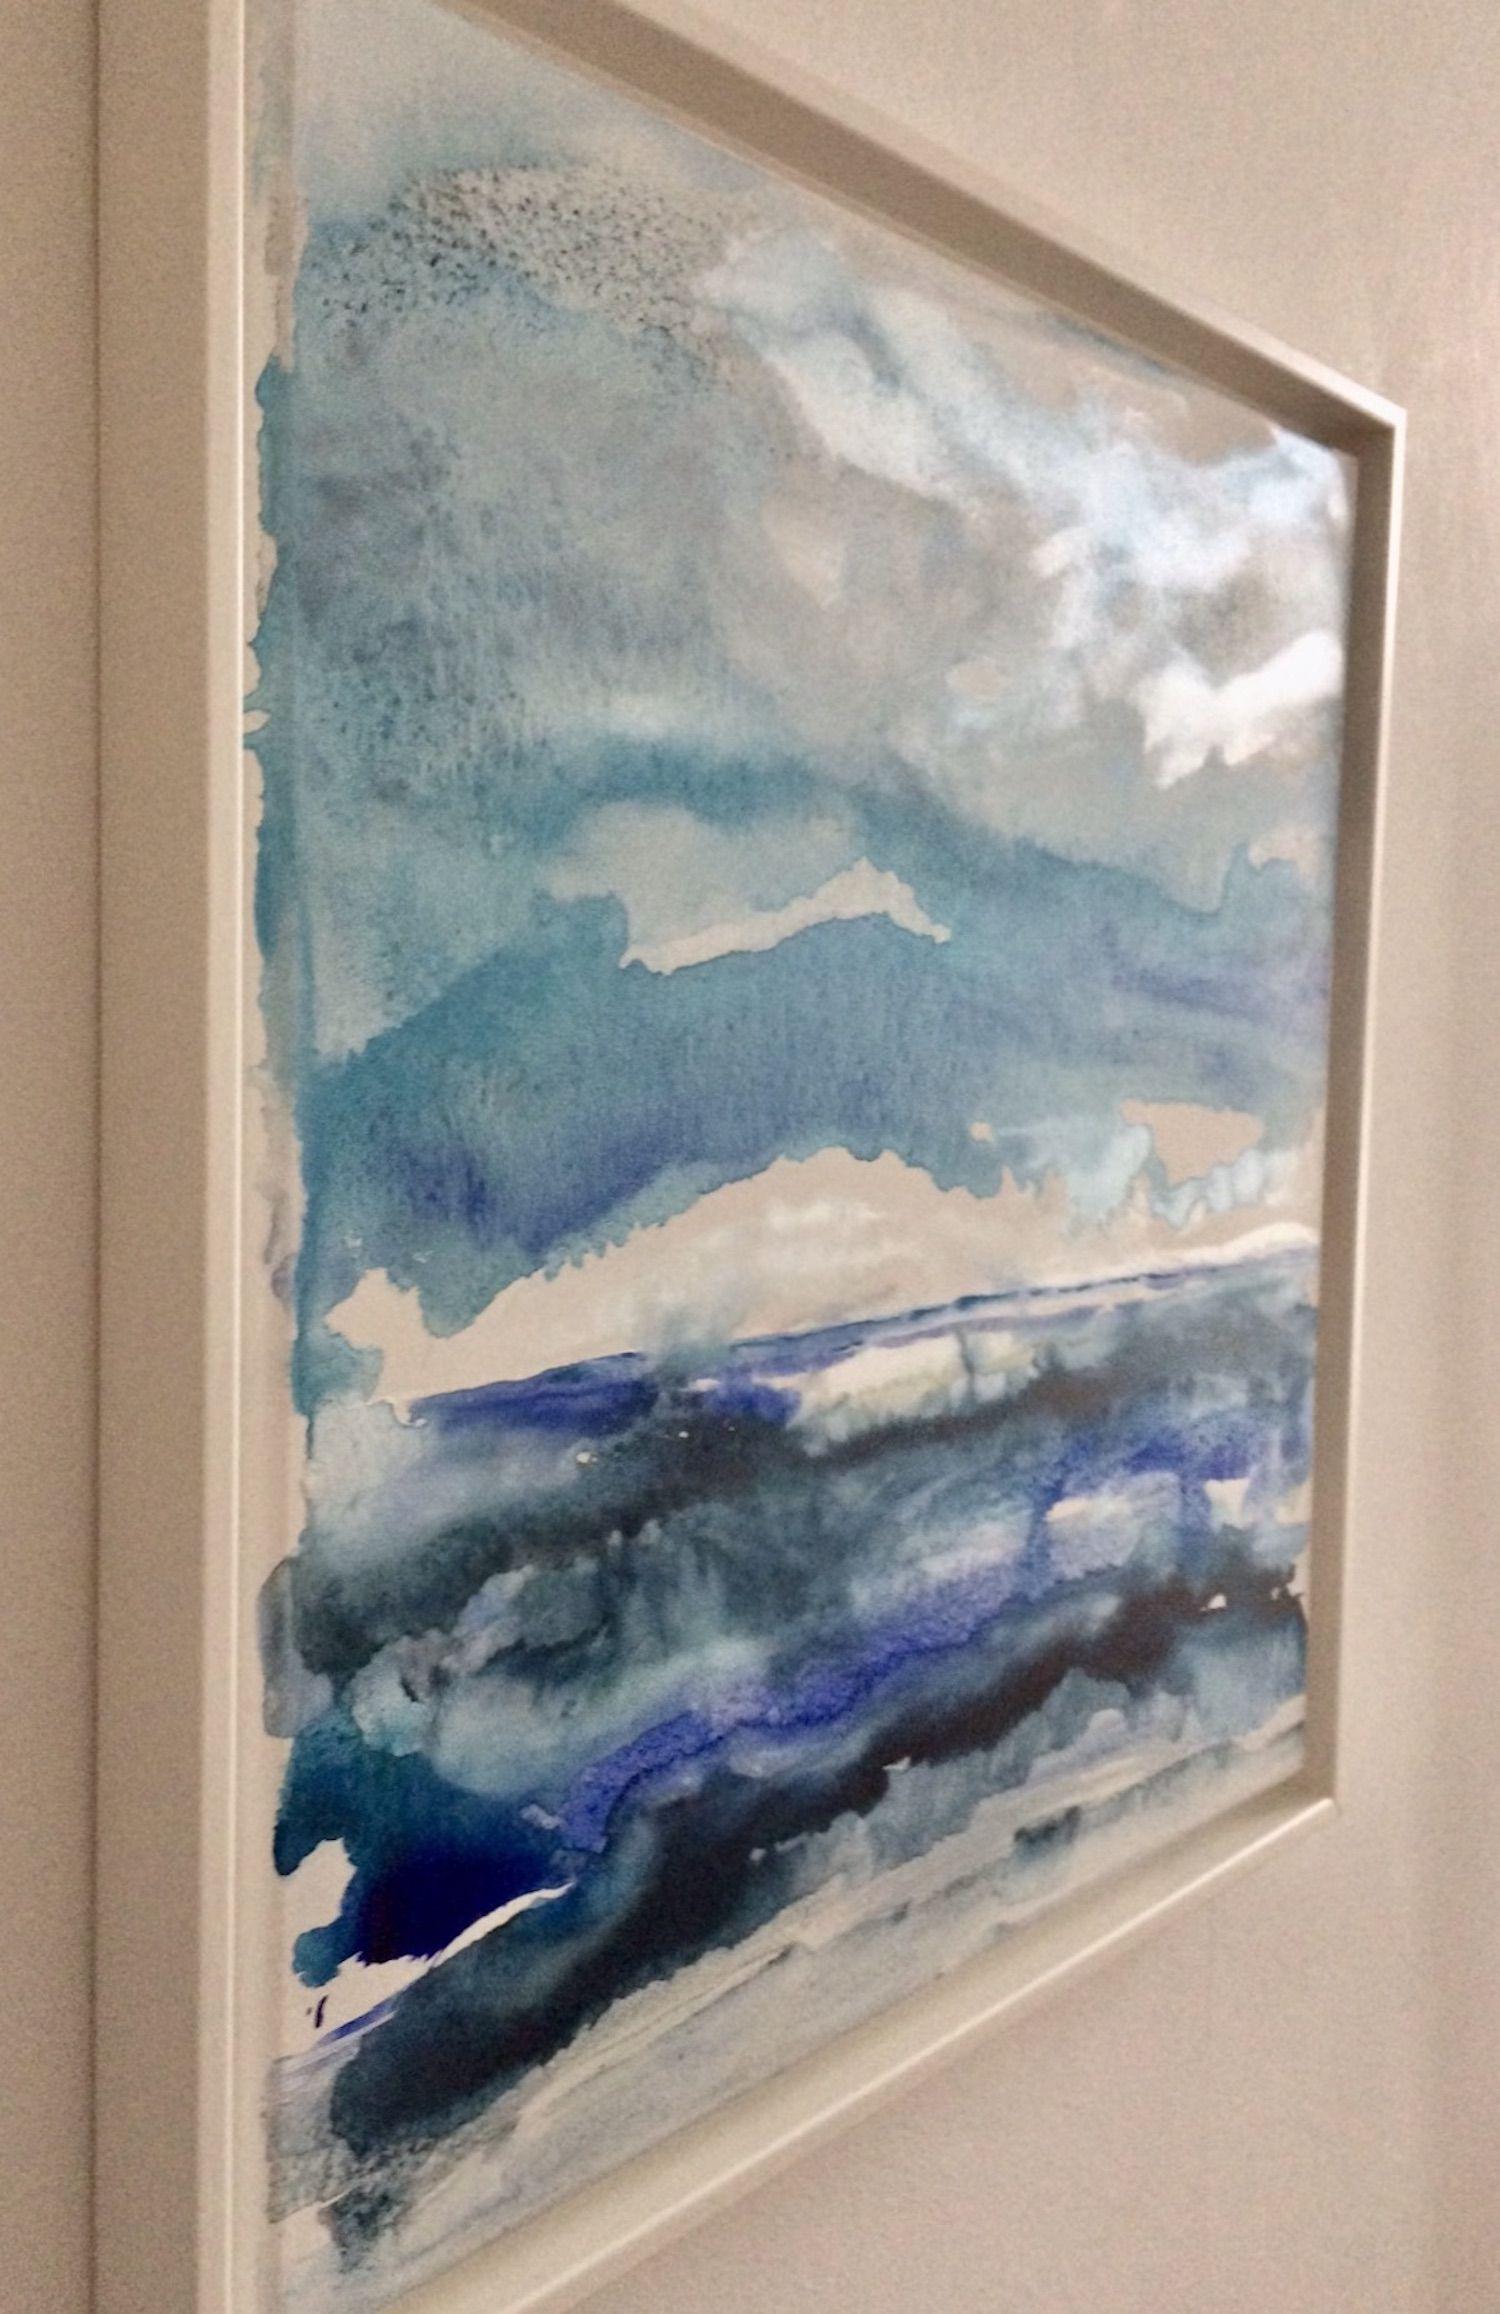 One of my new mixed watercolor paintings, done at the Baltic Sea, where we had a lot of changing lights, water, wind, clouds...    This painting shows lots of thin shadowy layers, giving it a dreamy but still powerful atmosphere. The colors are